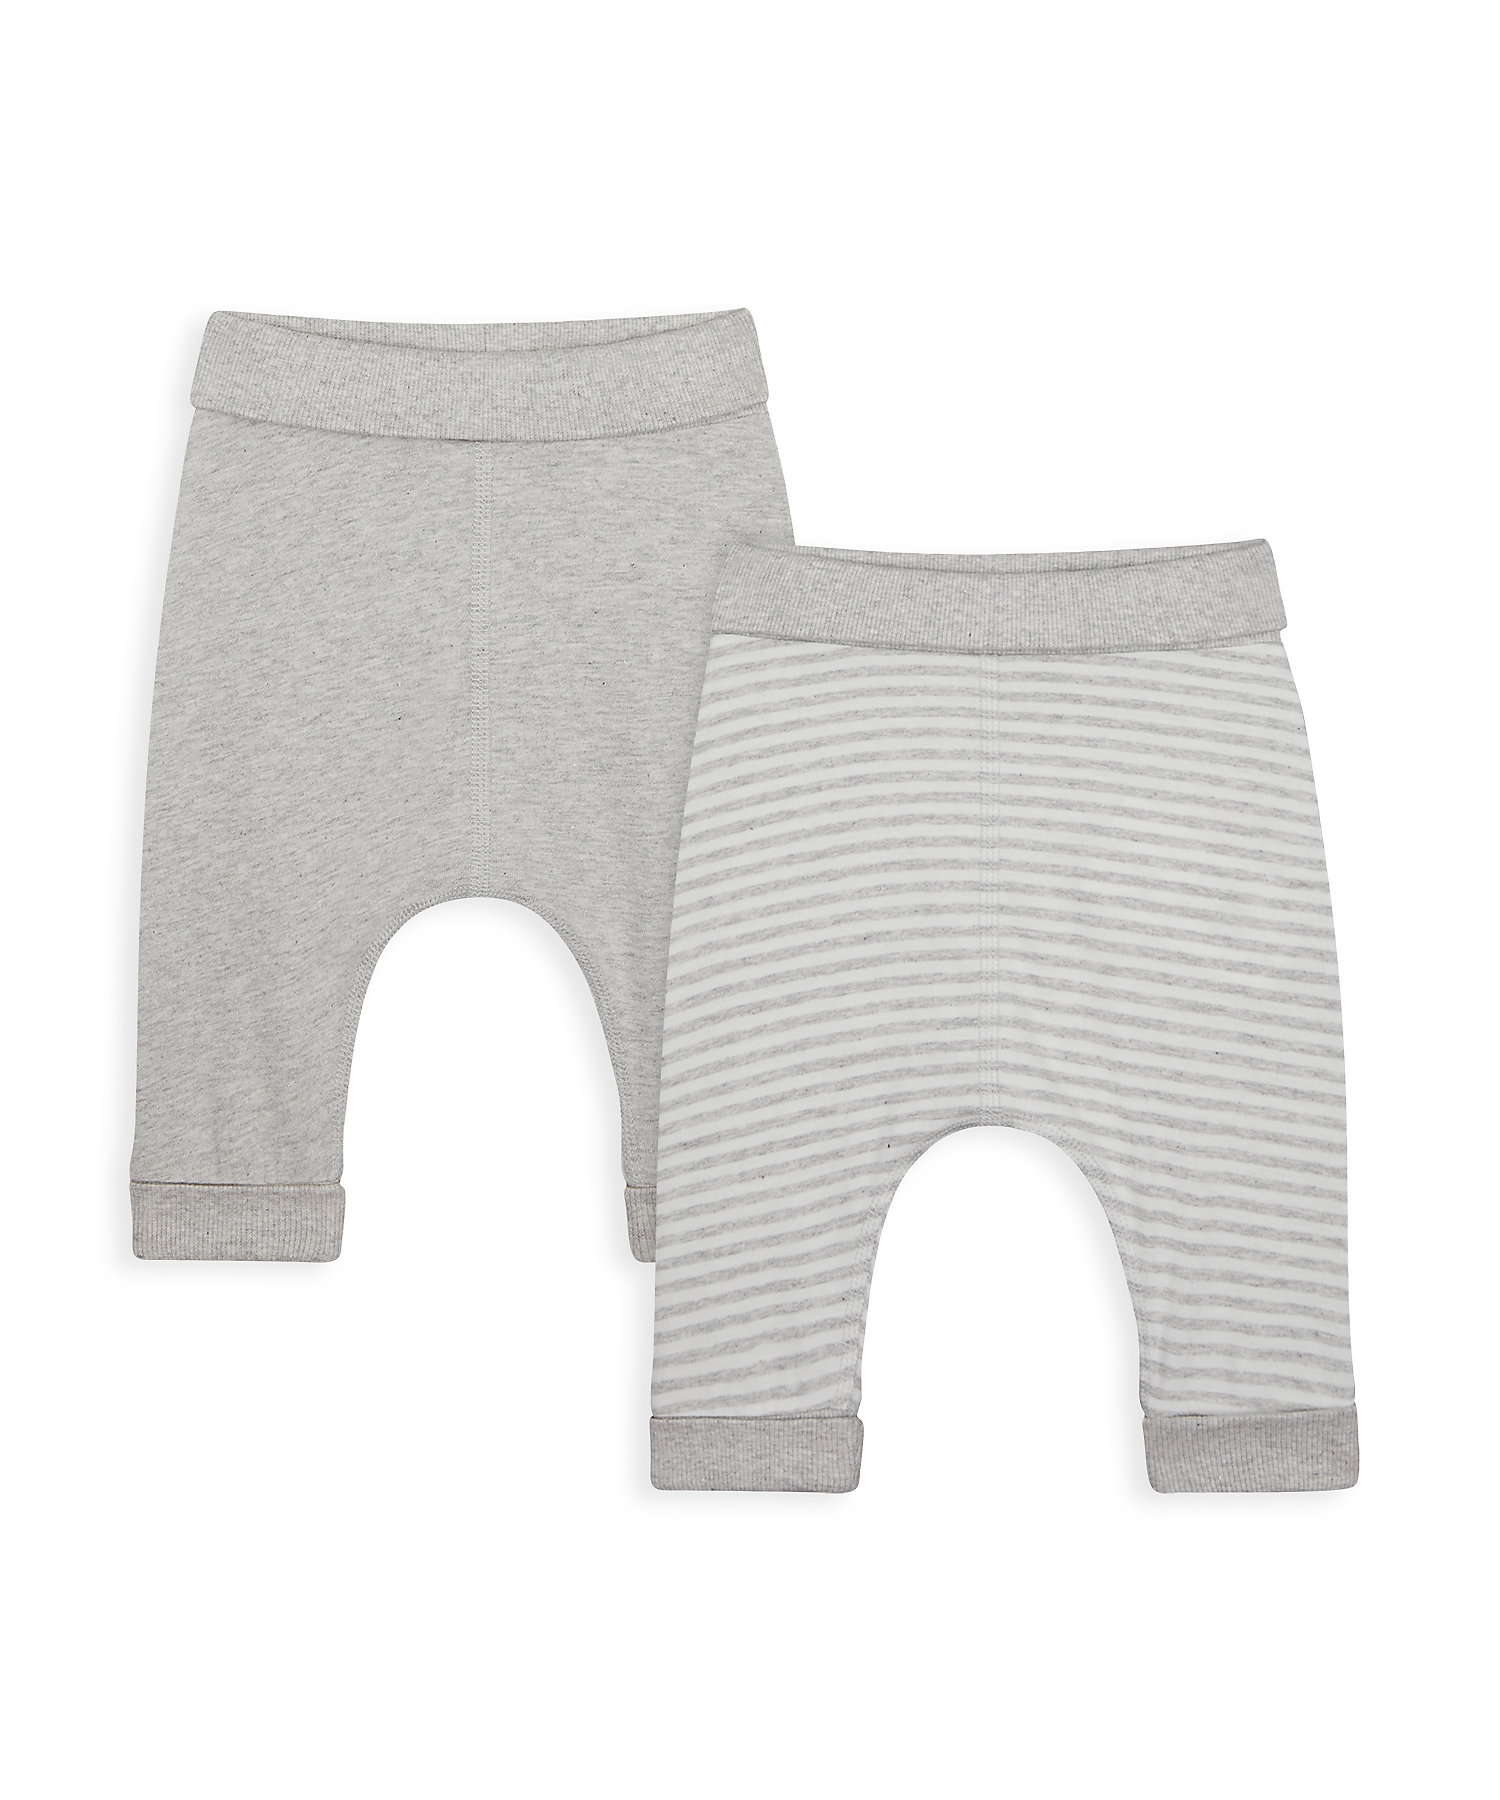 Unisex Joggers Striped - Pack Of 2 - Grey